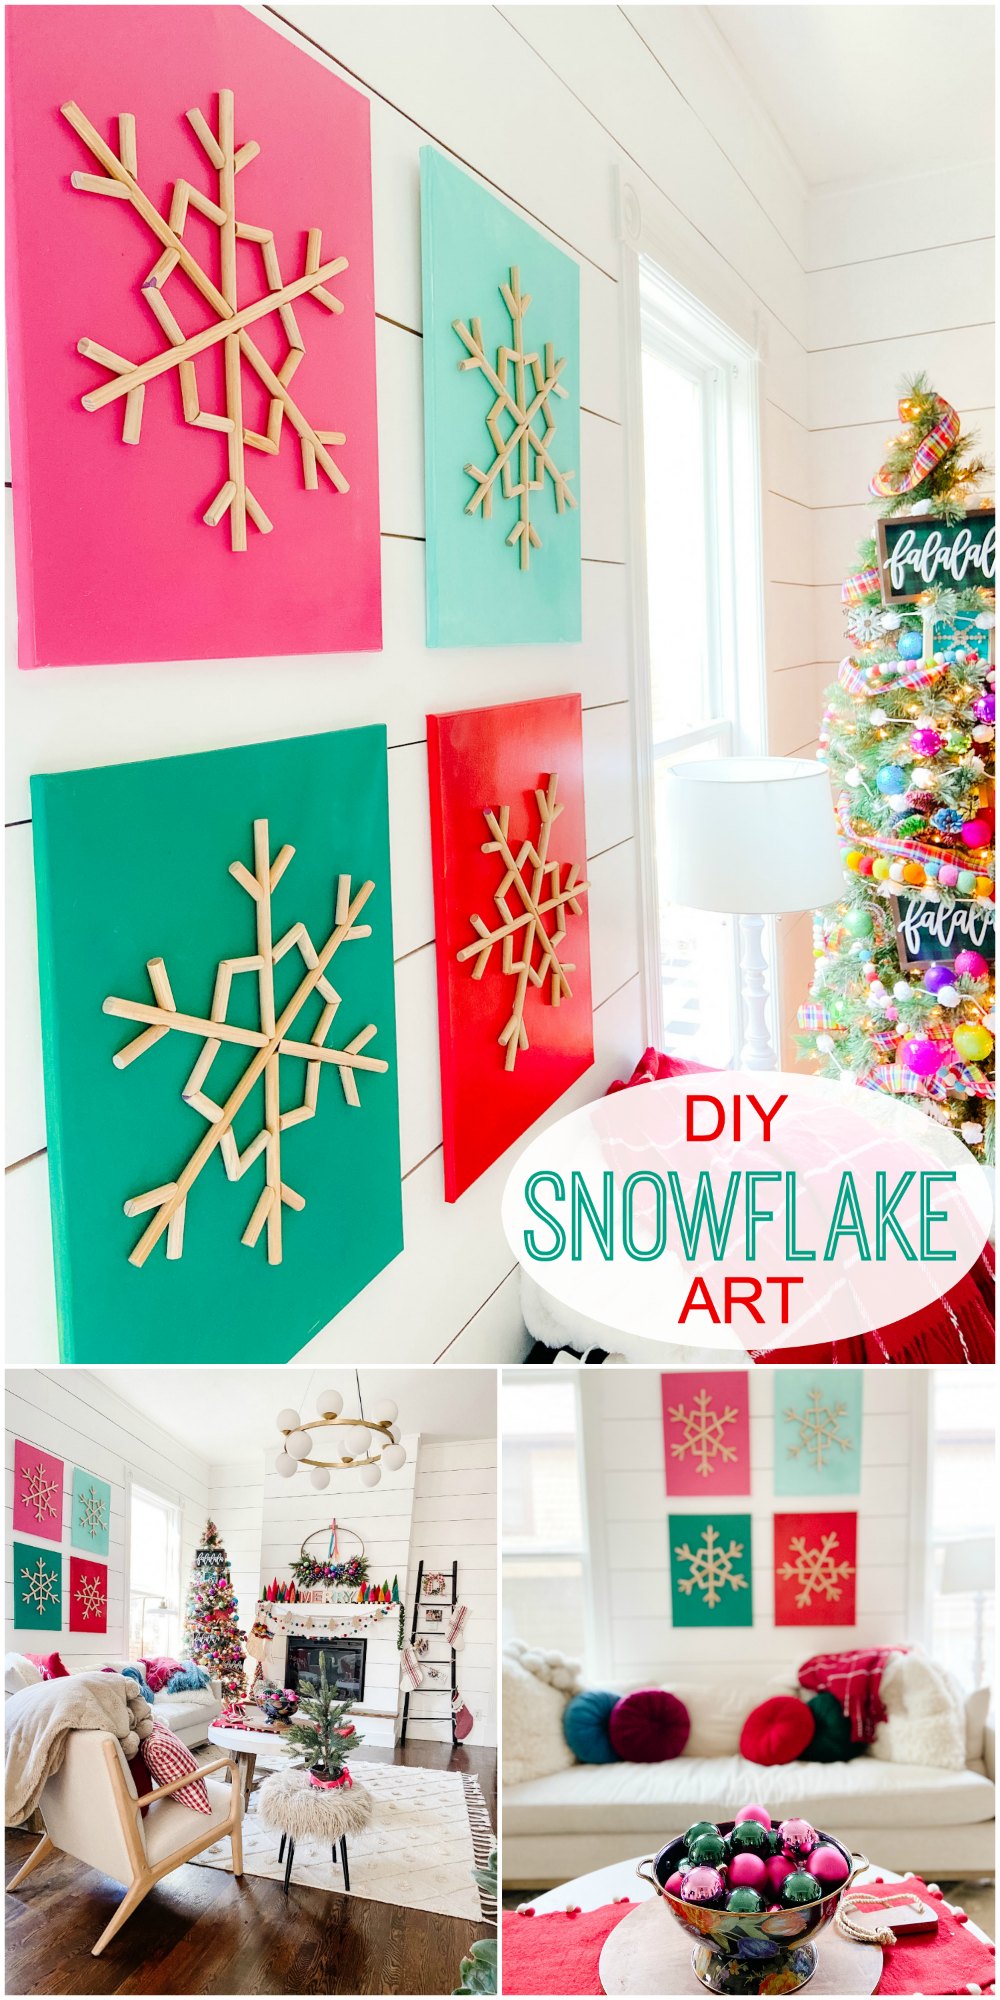 Snowflakes acrylic painting tutorial easy snow flakes painting on canvas  step by step for beginners 